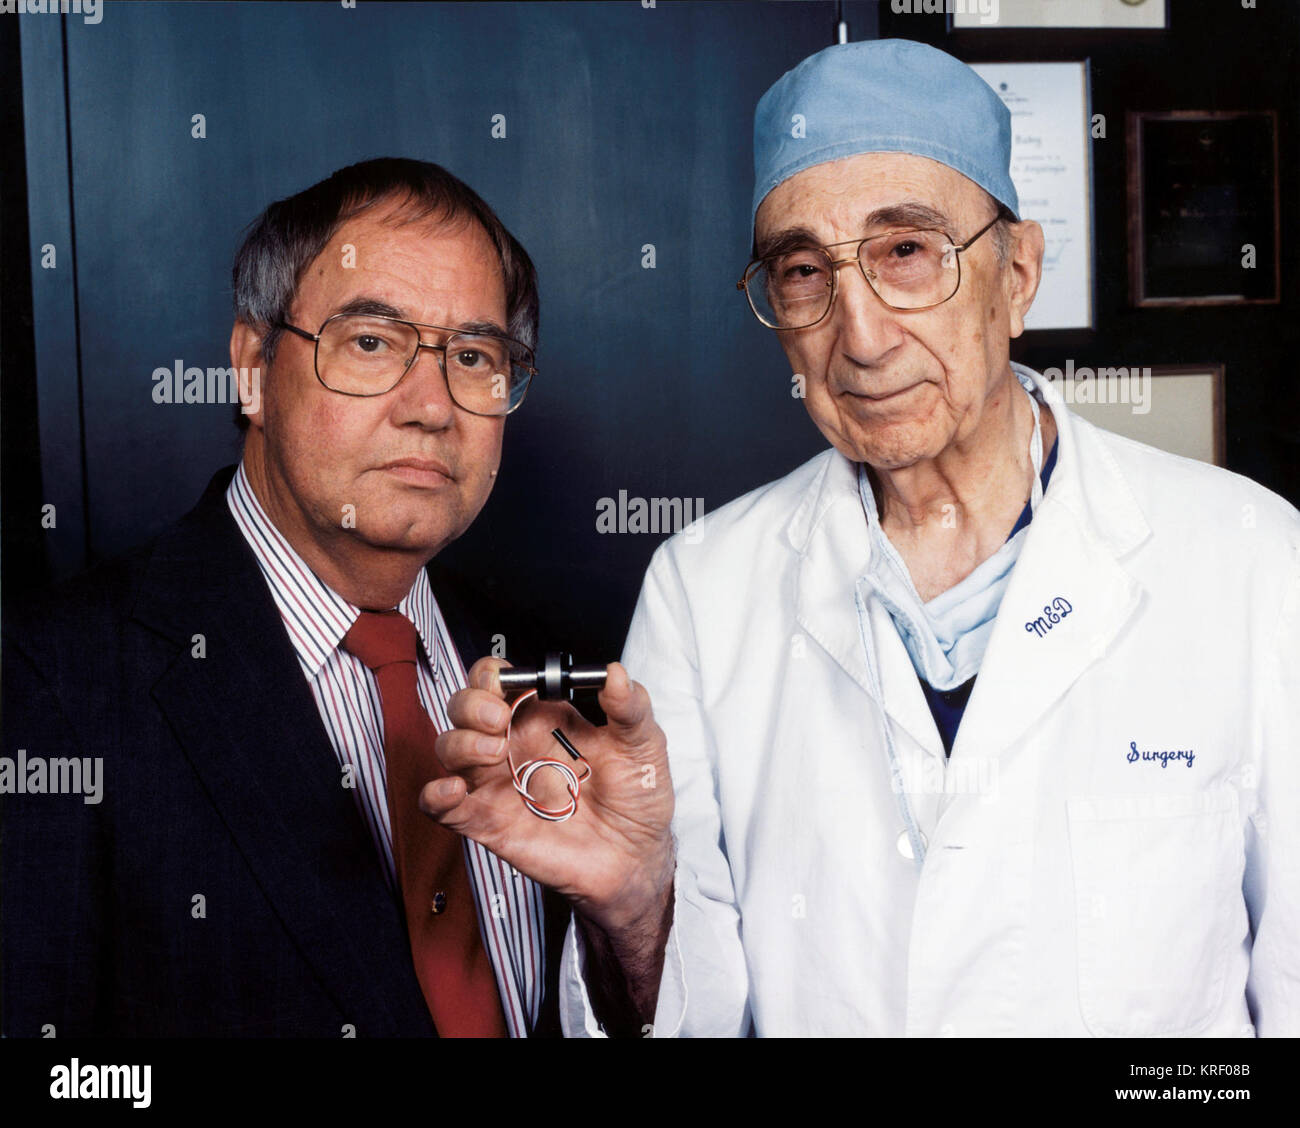 Debakey High Resolution Stock Photography and Images - Alamy